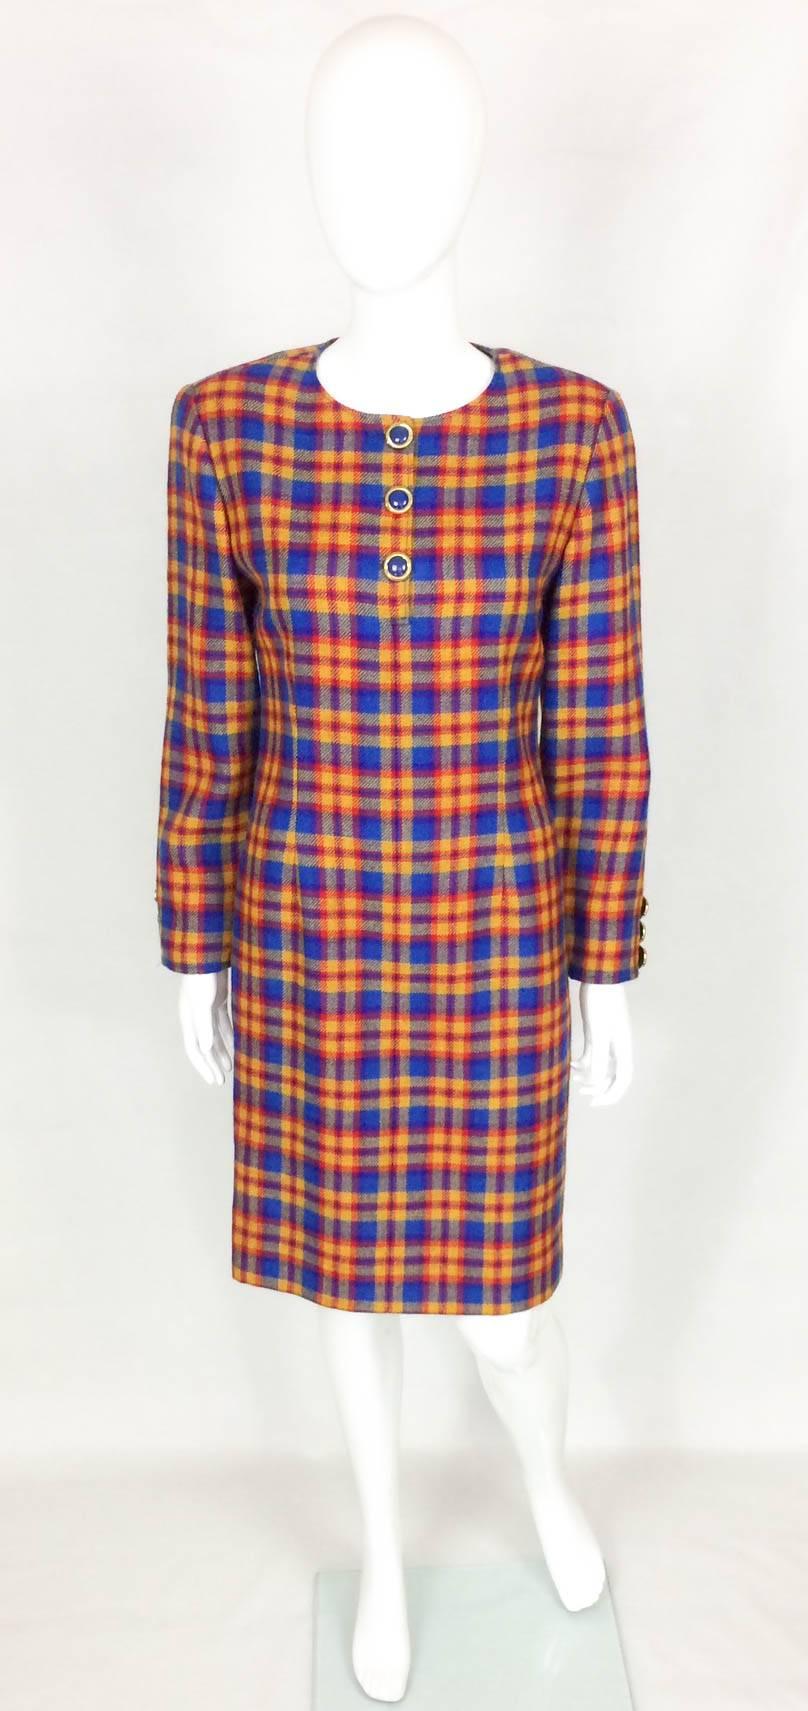 Striking Vintage Valentino Wool Plaid Dress. This great looking knee-length dress features a 3-button collar and 3-faux-button cuffs. The plaid pattern is in red, orange and blue. On the back there is an invisible zipper and a modest slit. Fully